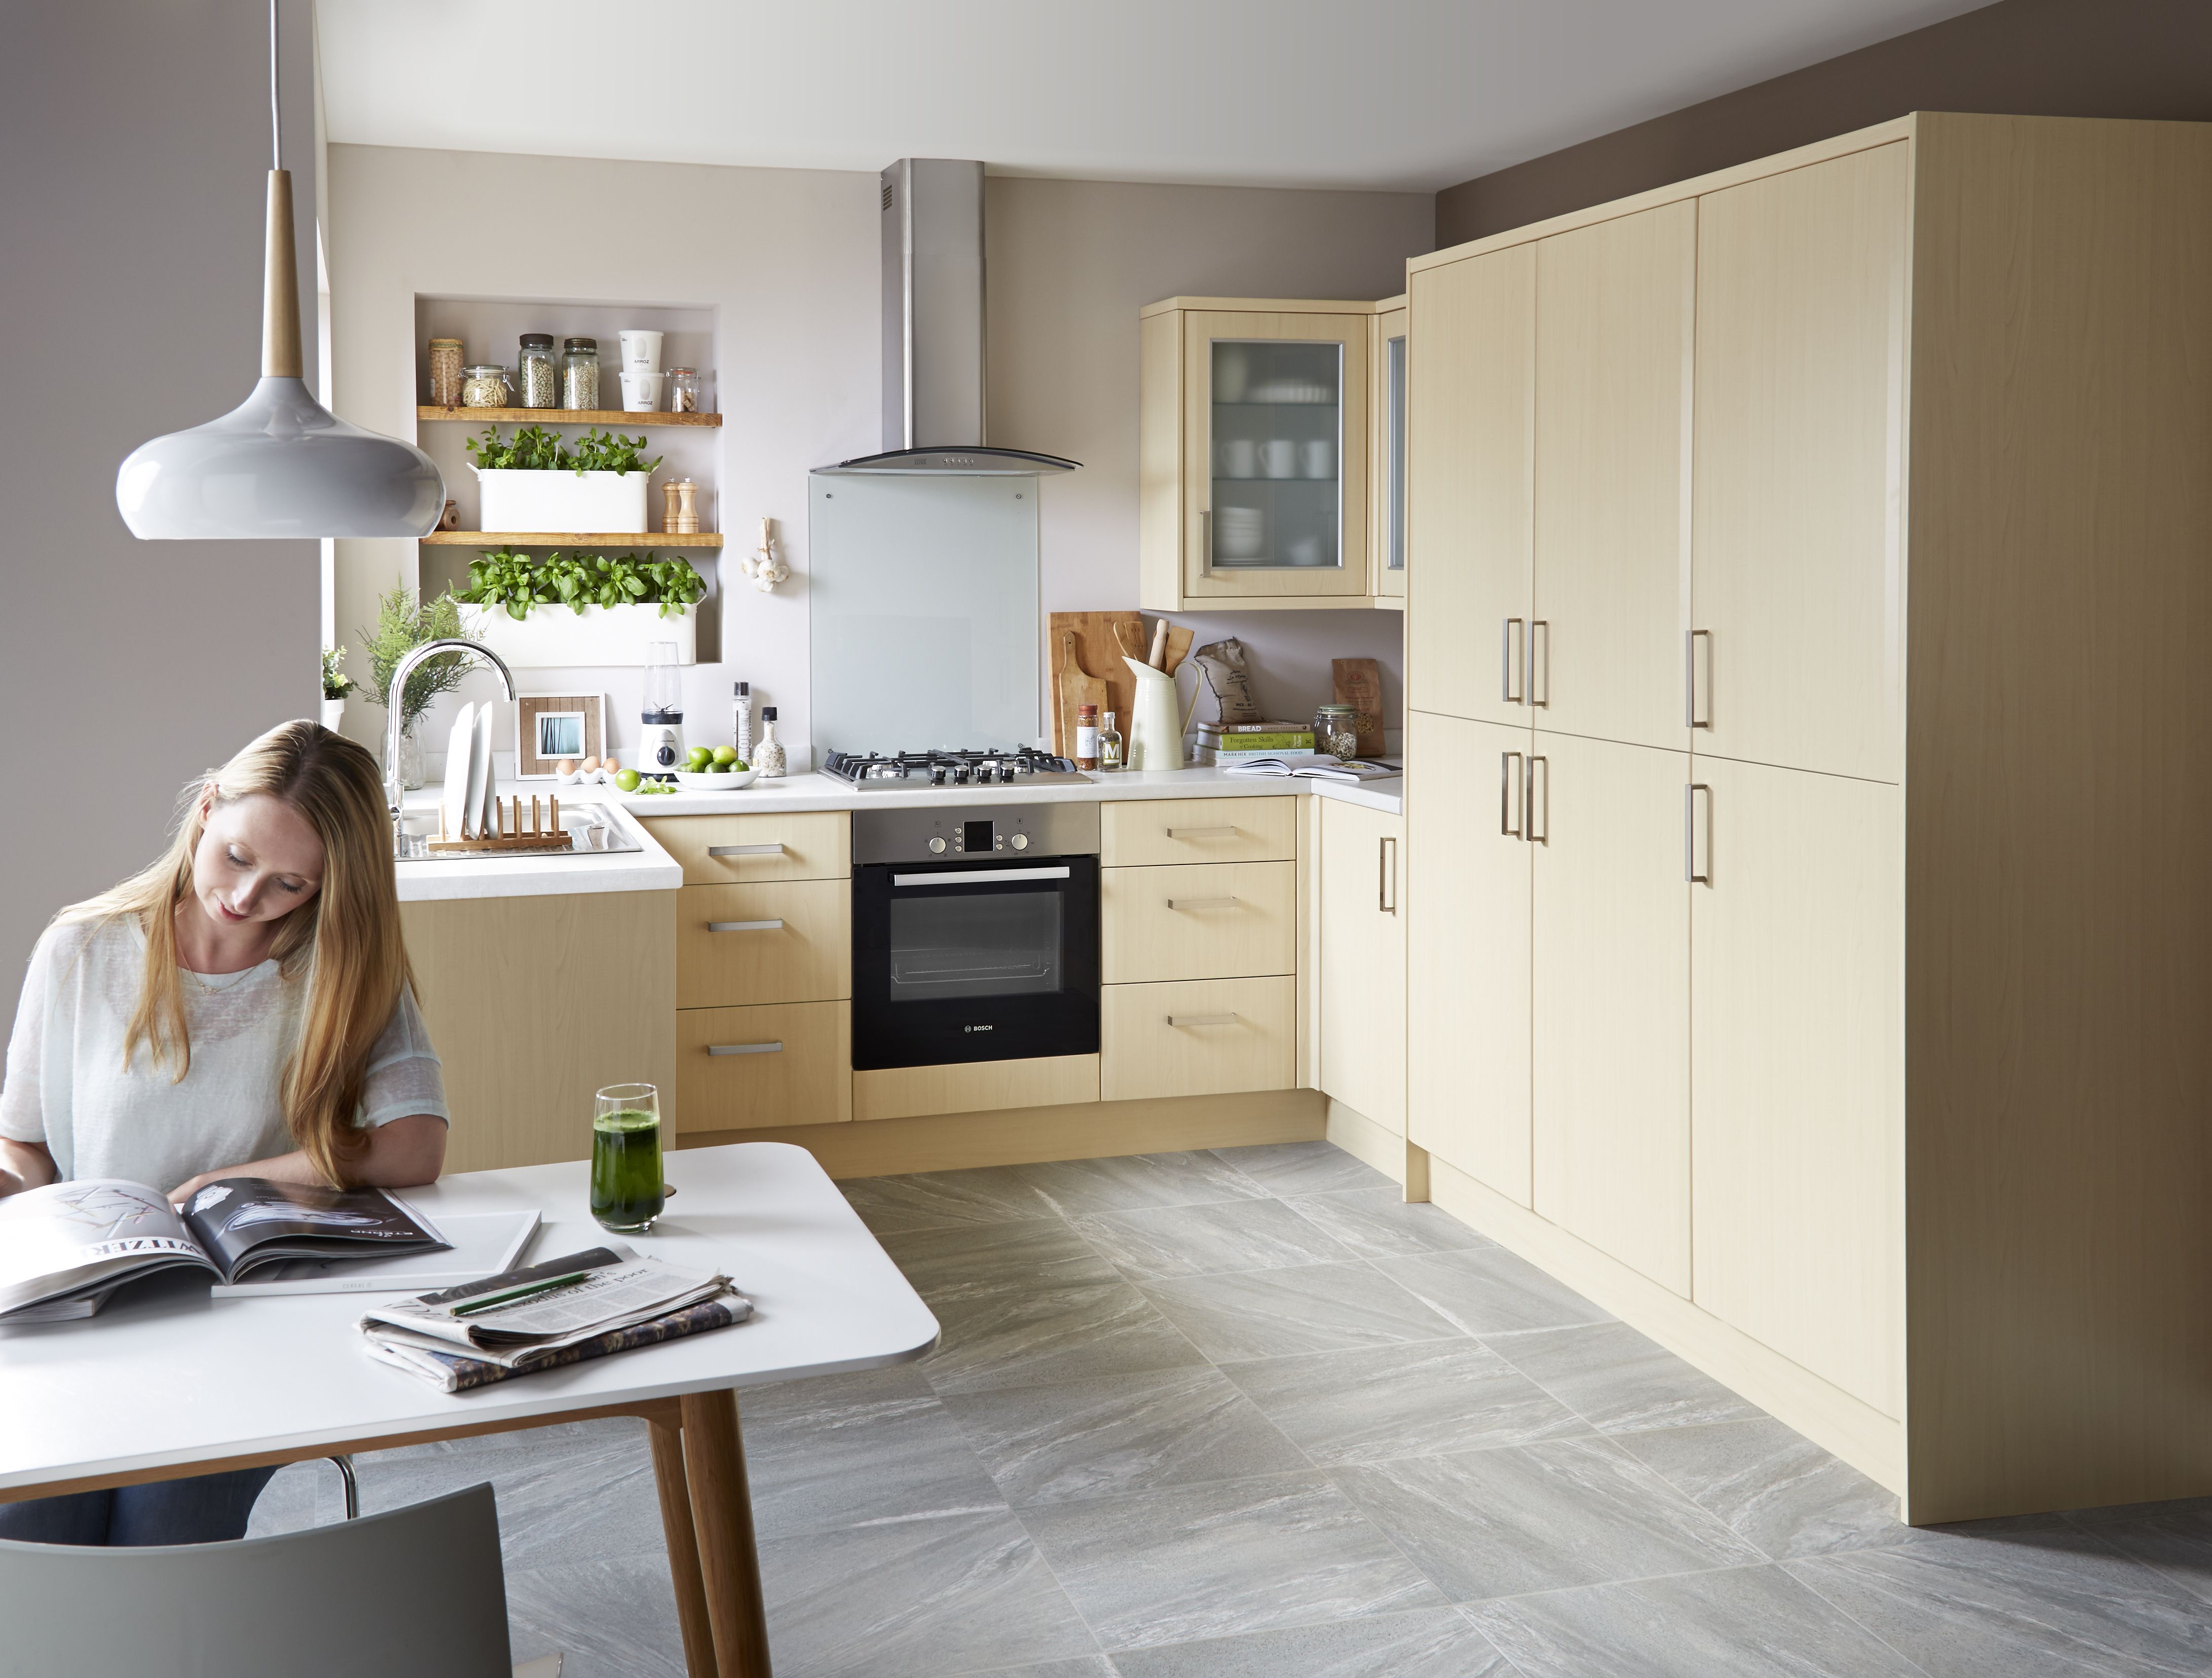 Kitchen planning appointments | Ideas & Advice | DIY at B&Q